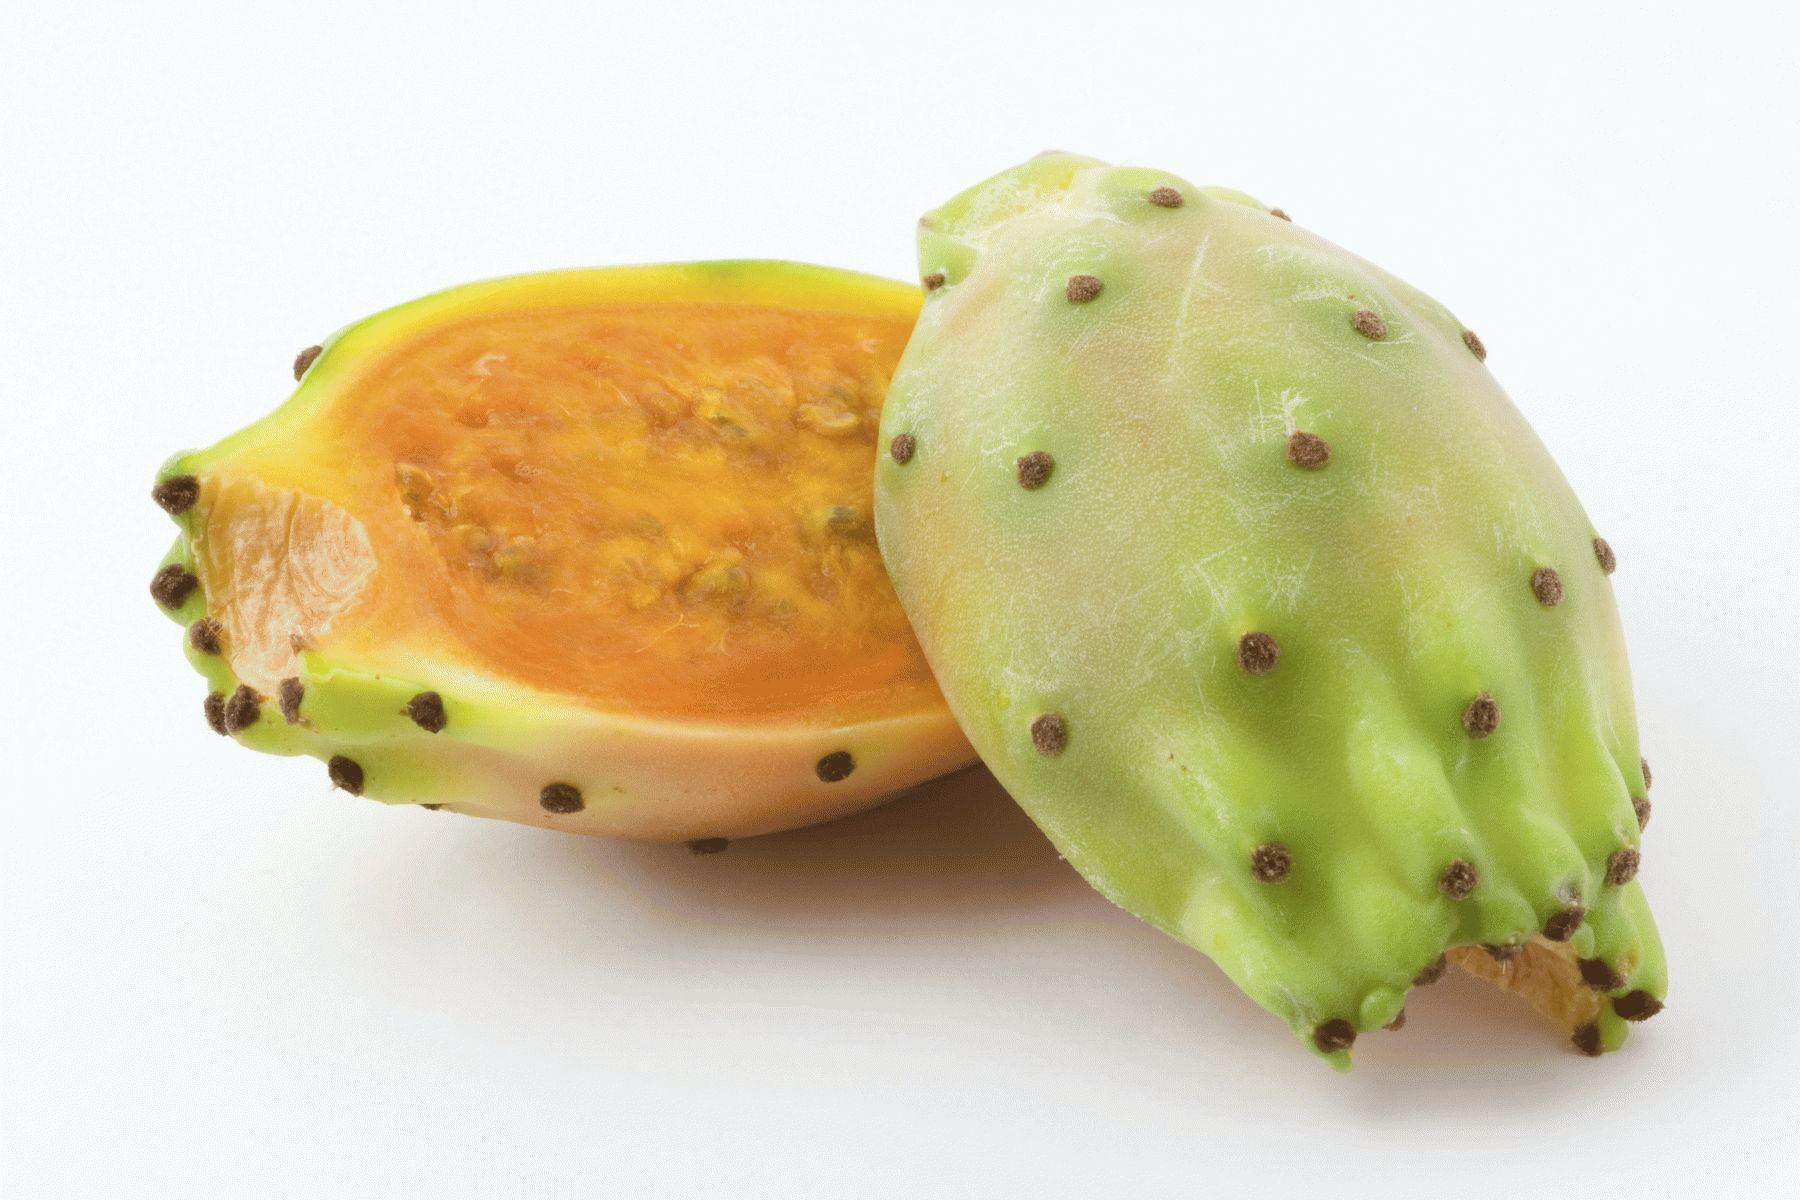 Will Prickly Pear Trend in Beverages?